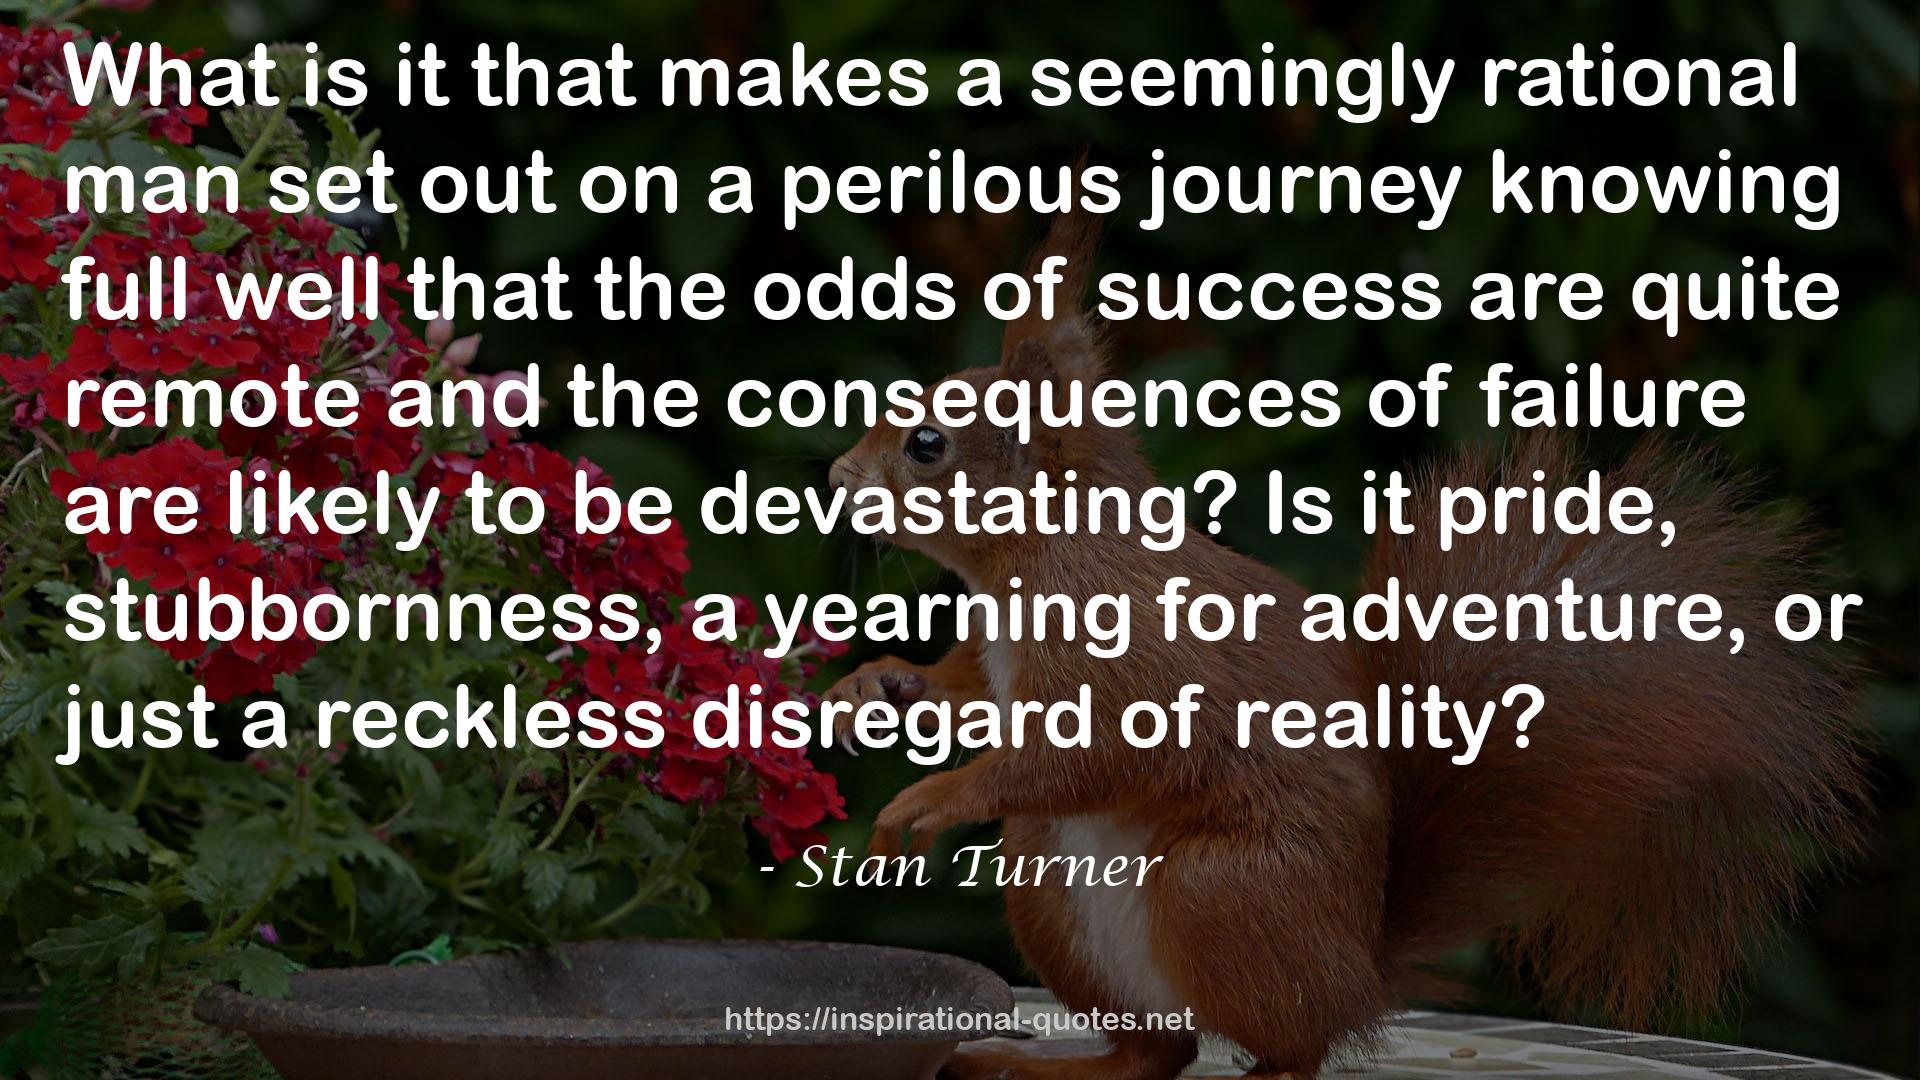 Stan Turner QUOTES